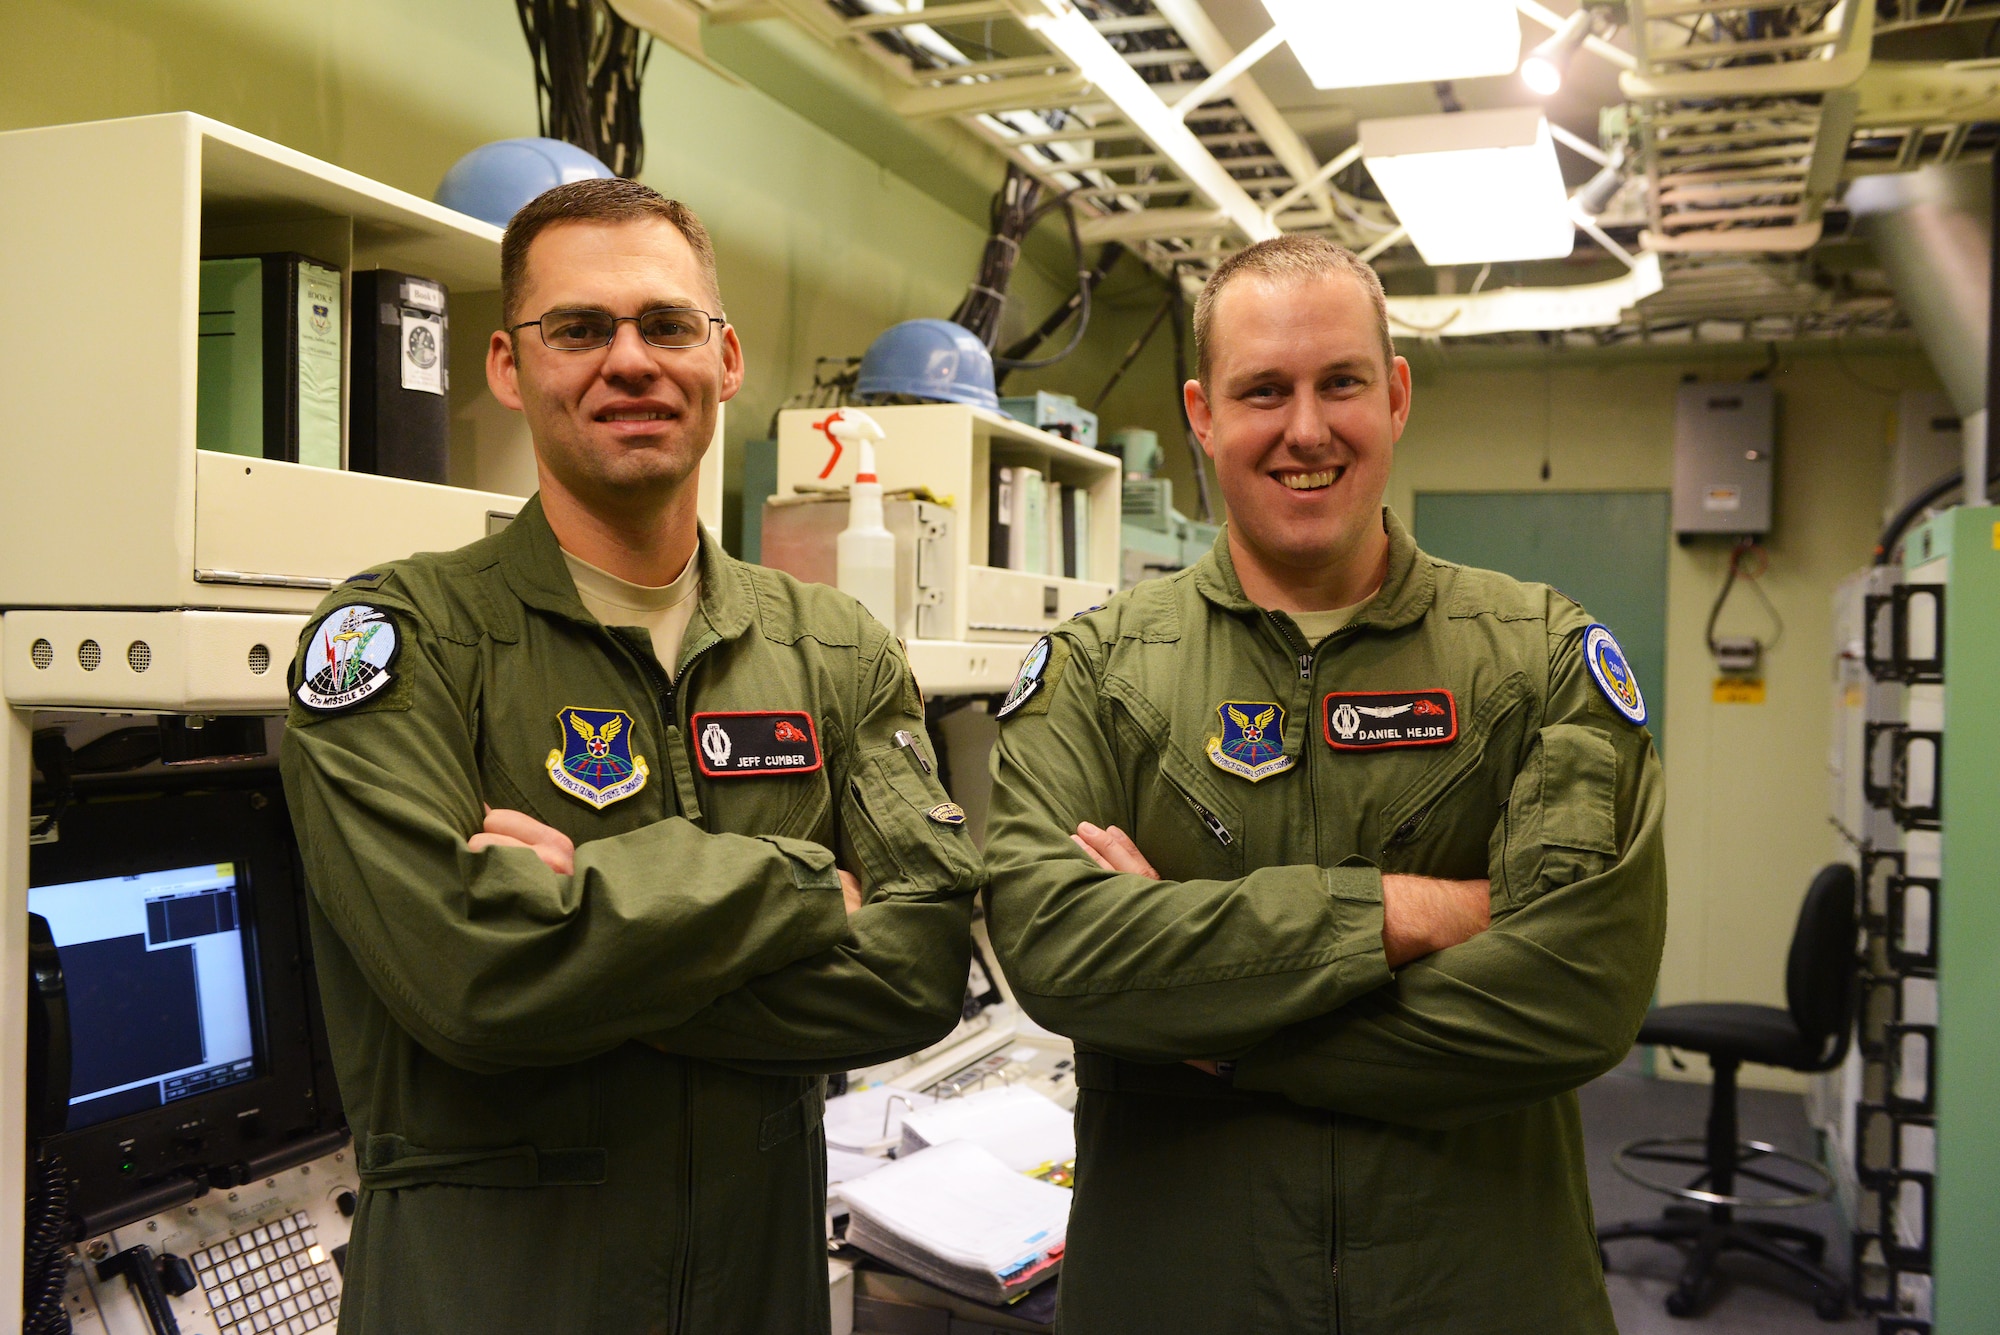 1st Lt. Jeff Cumber, 12th Missile Squadron deputy missile combat crew commander (left), and Capt. Dan Hejde, 12th MS combat missile crew commander, pose for a photograph after a training session at Malmstrom Air Force Base Sept. 24. The team is one of nine from the base that will be competing in the 2014 Air Force Global Strike Challenge. (U.S. Air Force photo/Airman 1st Class Collin Schmidt)